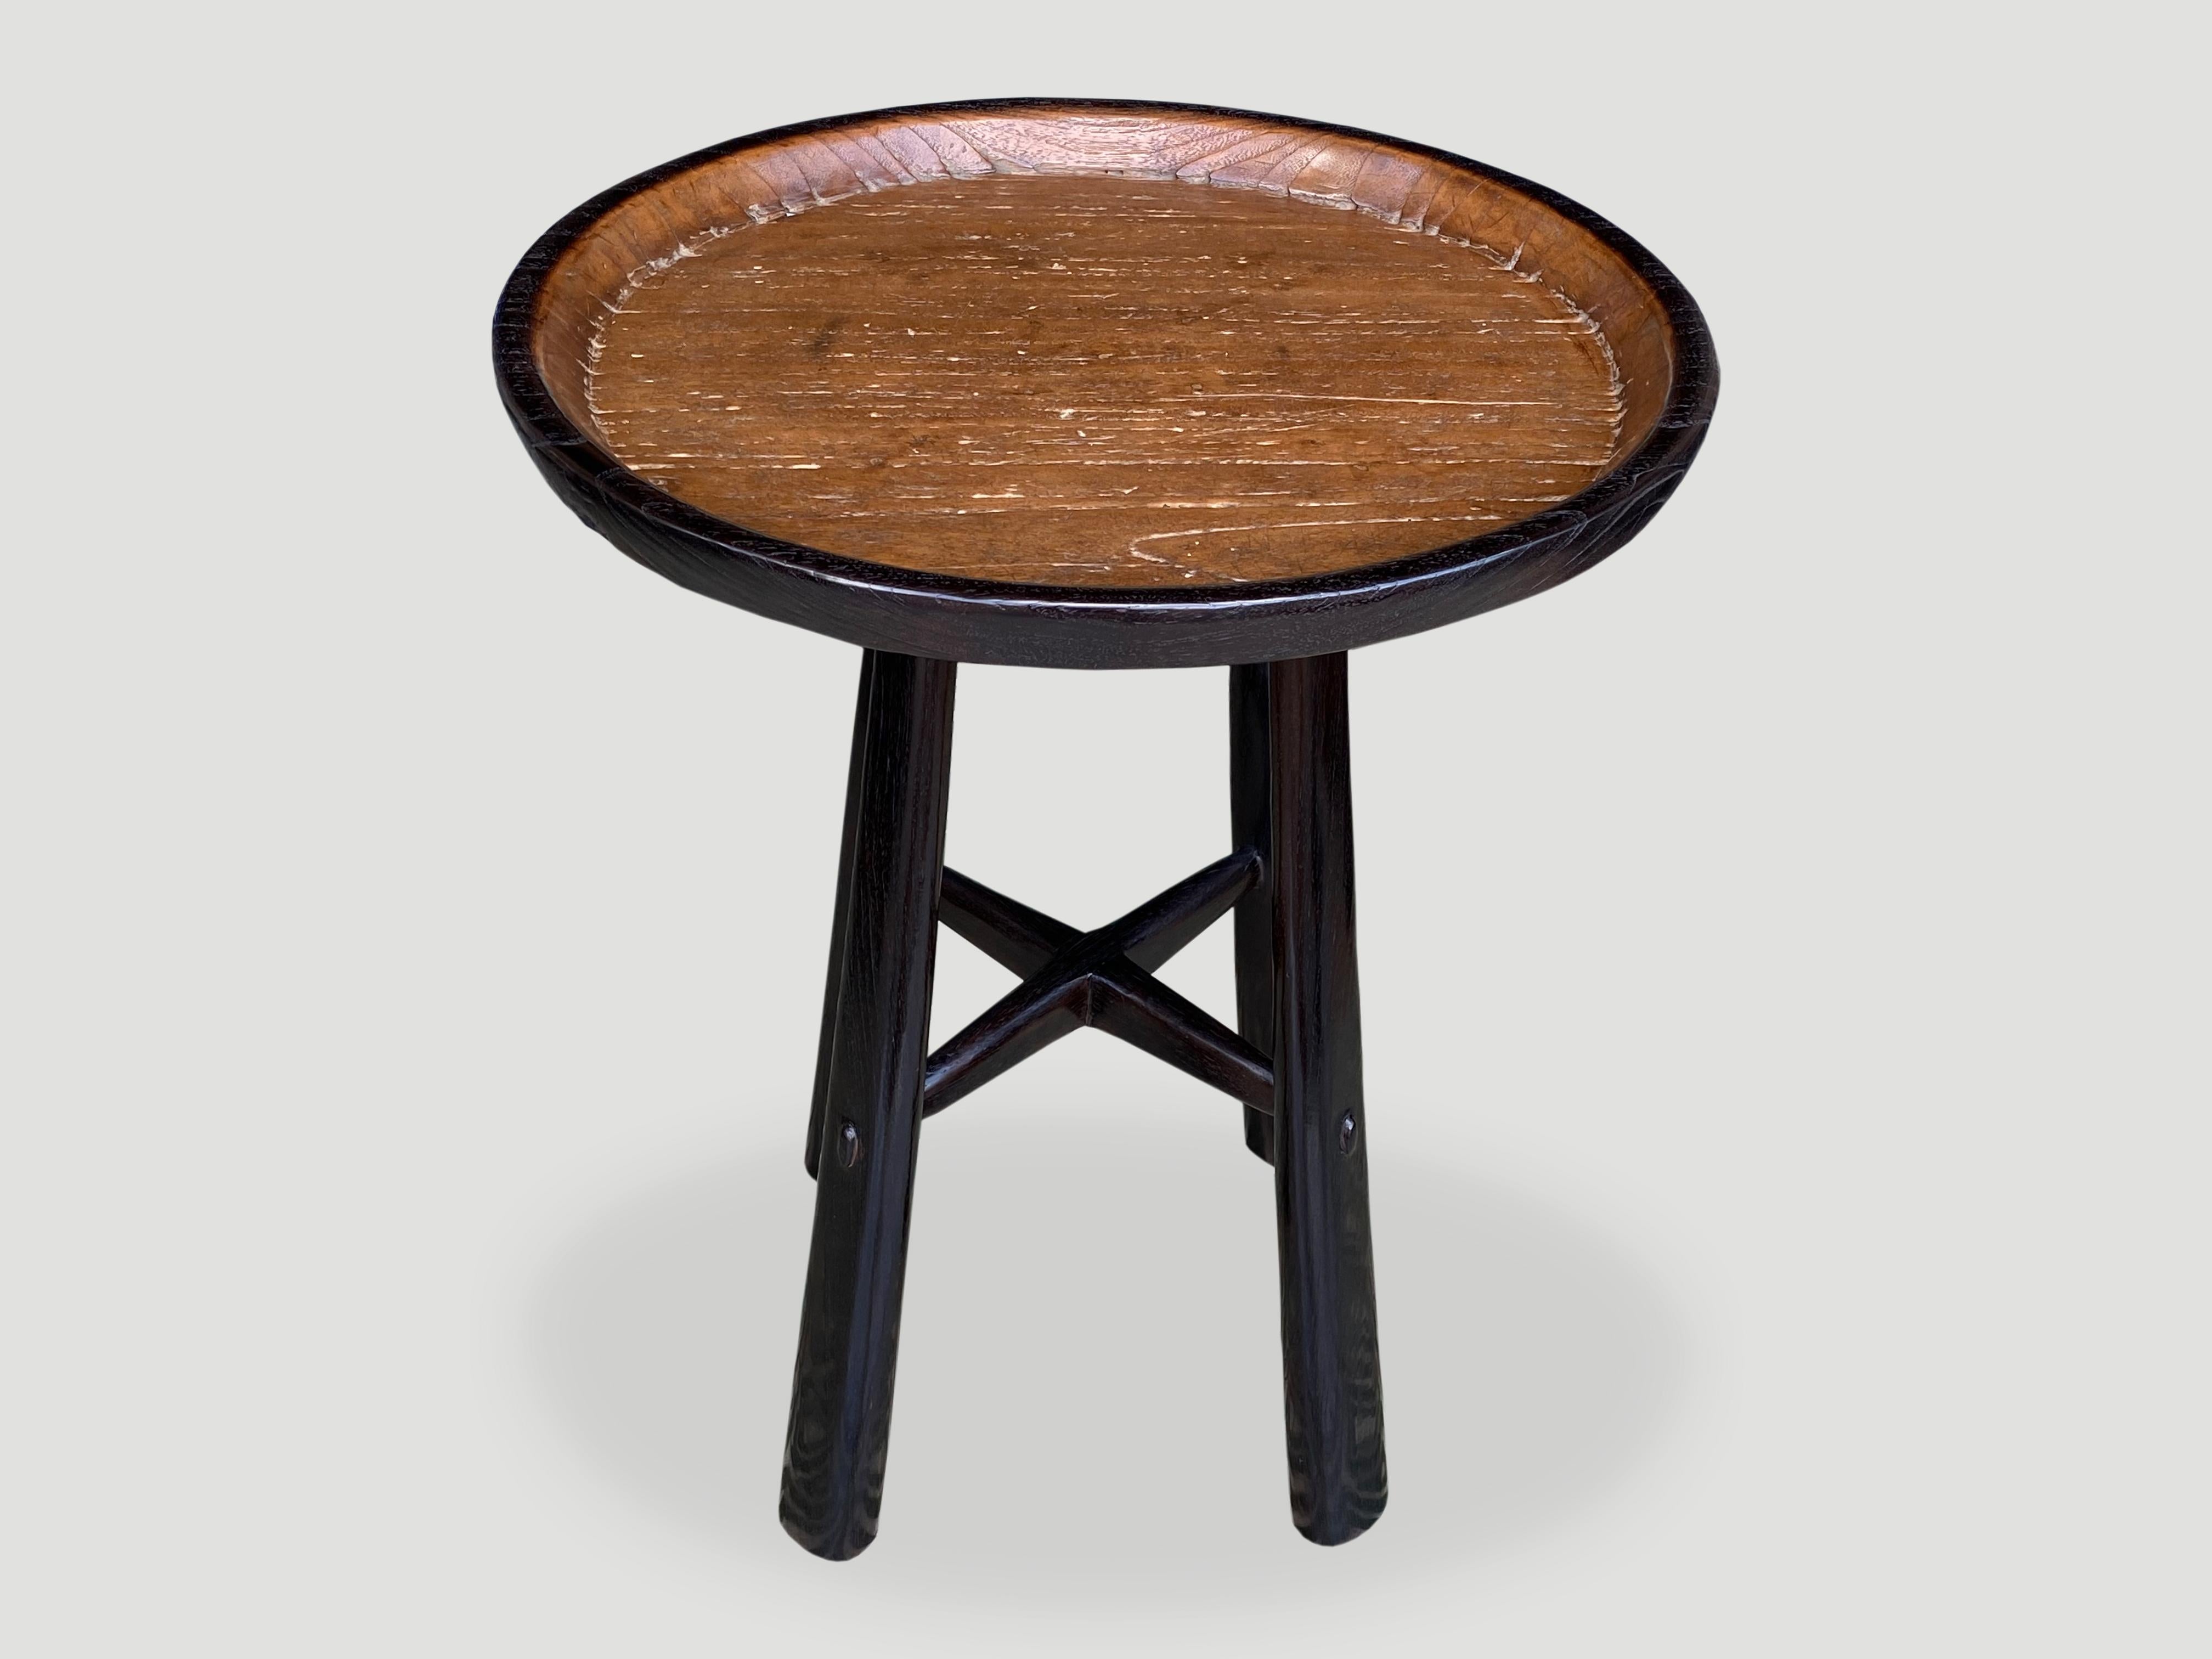 Andrianna Shamaris Midcentury Couture Antique Teak Wood Tray Side Table In Excellent Condition For Sale In New York, NY